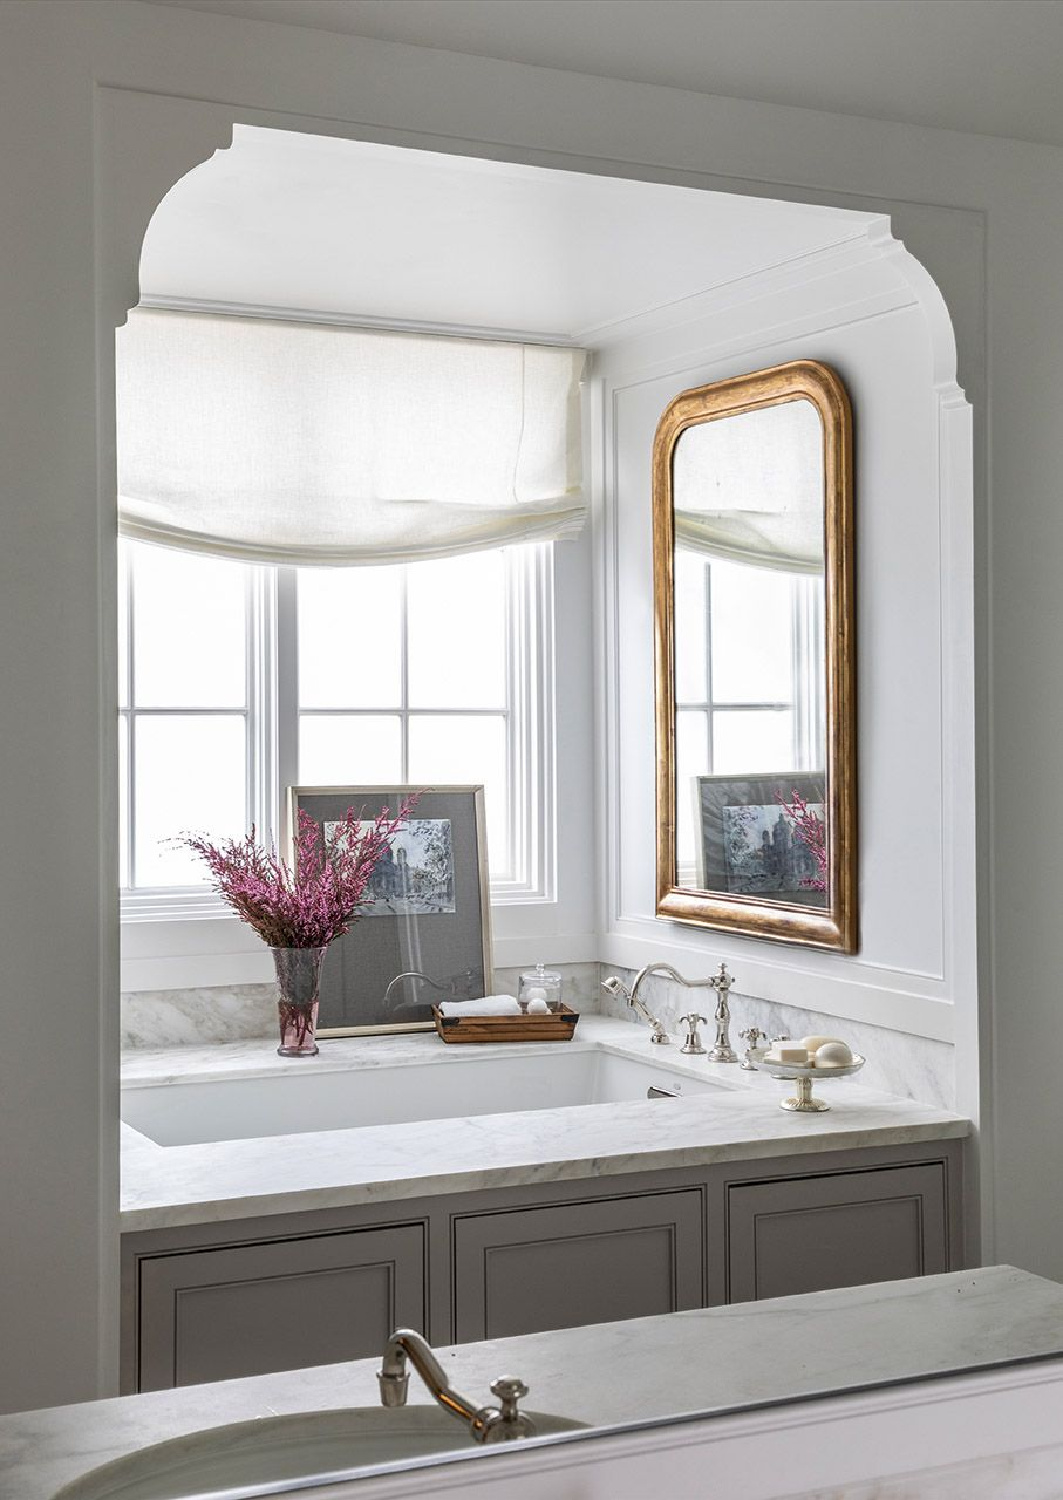 Luxurious and timeless bath in Marie Flanigan's THE BEAUTY OF HOME: Redefining Traditional Interiors (Gibbs Smith, 2020).